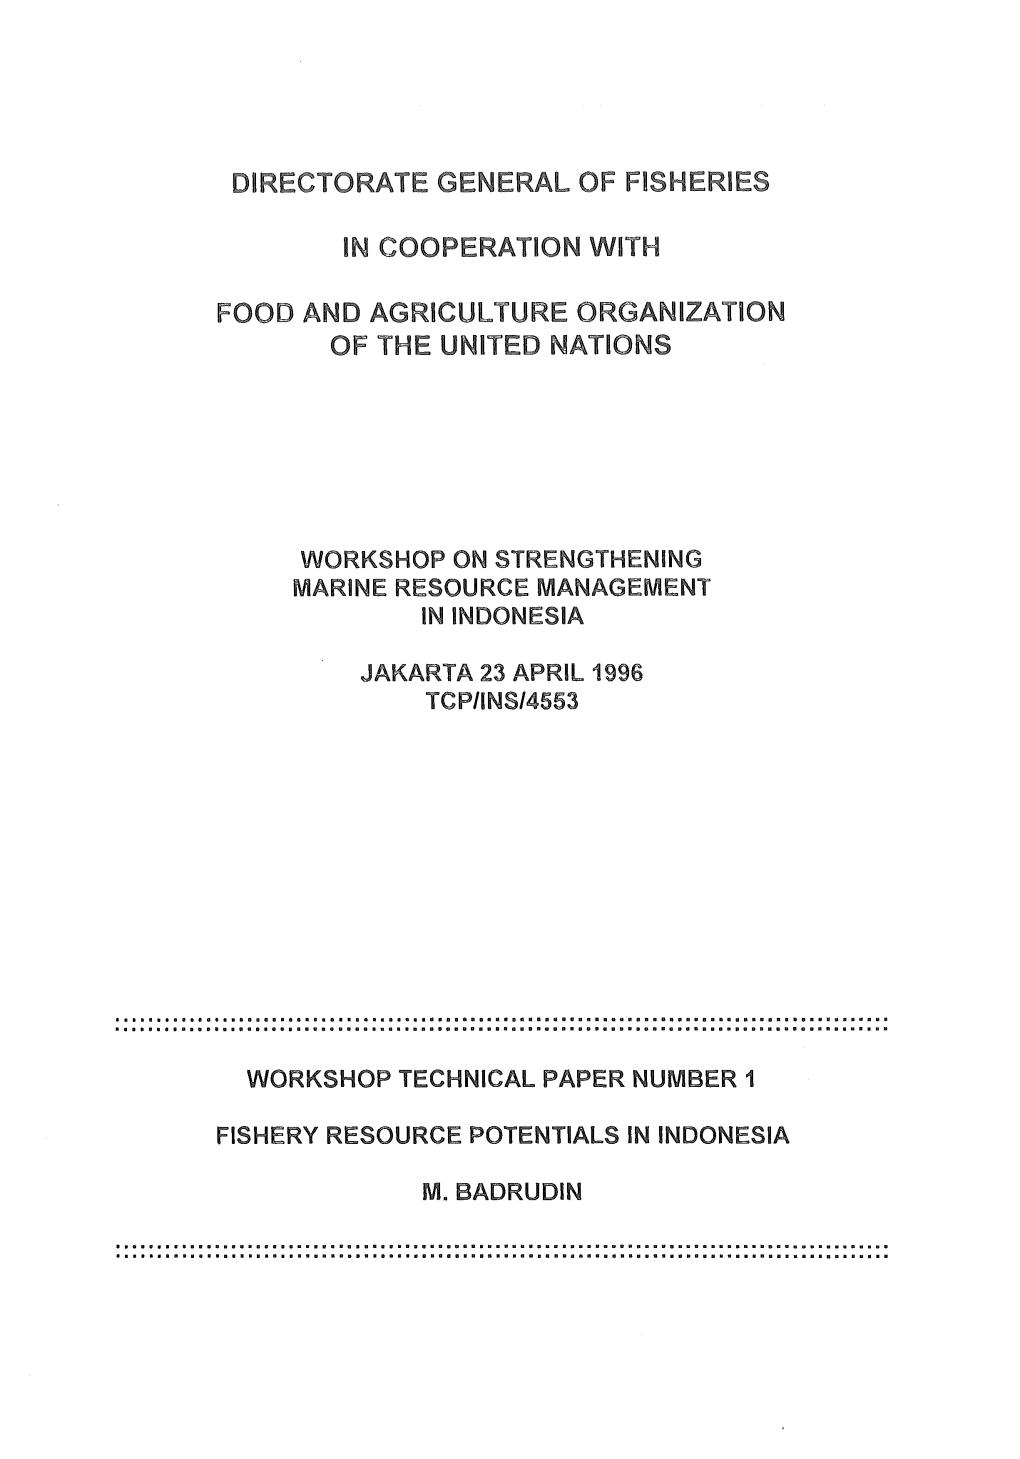 Fishery Resource Potentials in Indonesia